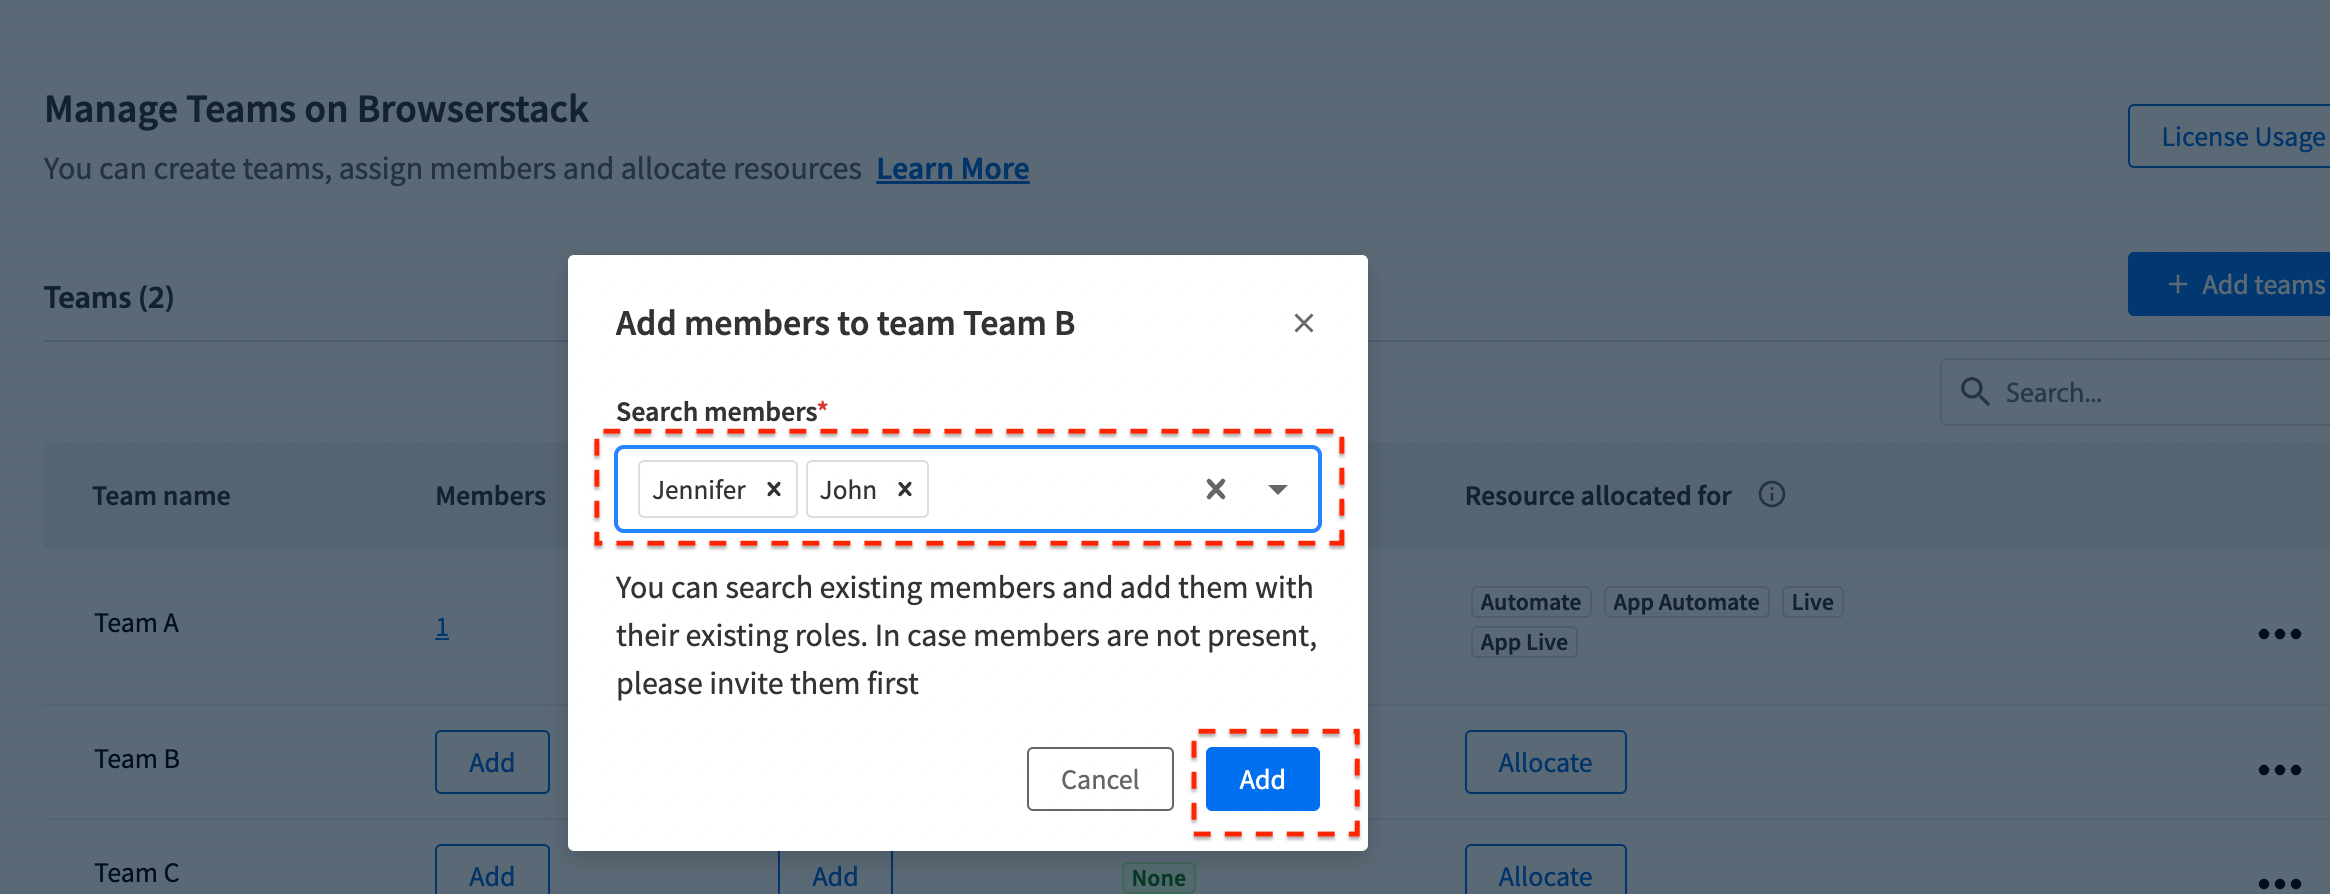 Assign Members to Team Dialog